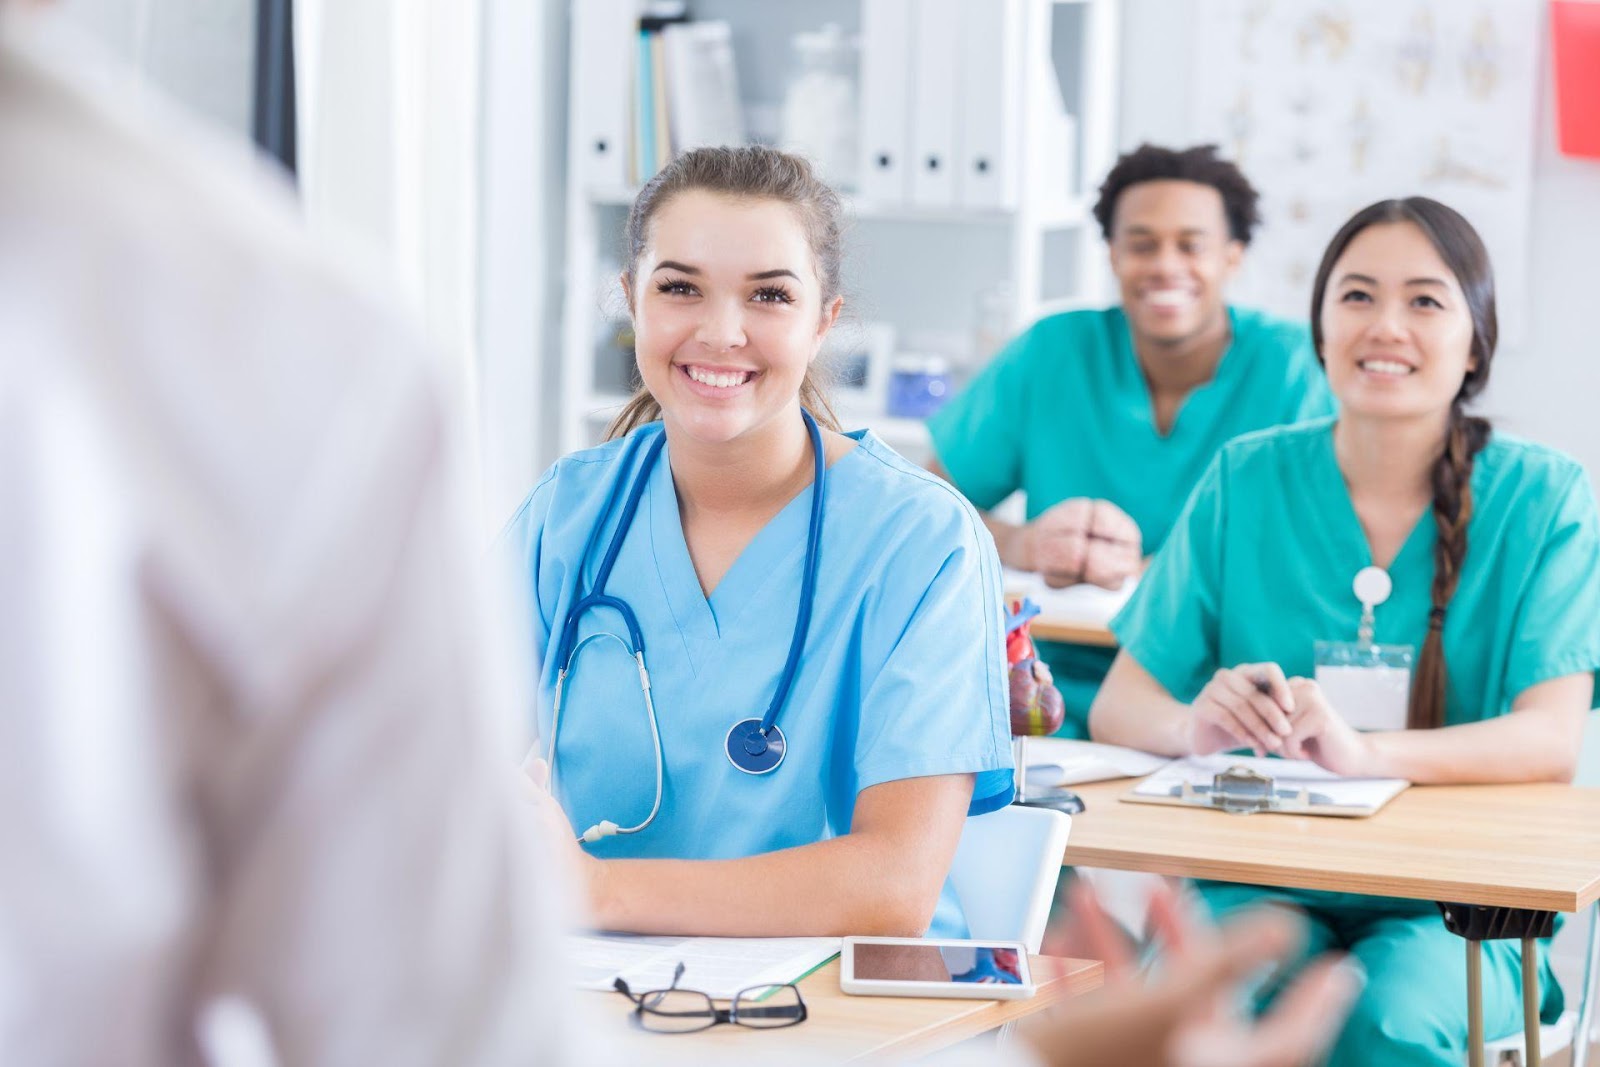 10 Tips To Improve Your Chances of Getting Into Nursing School